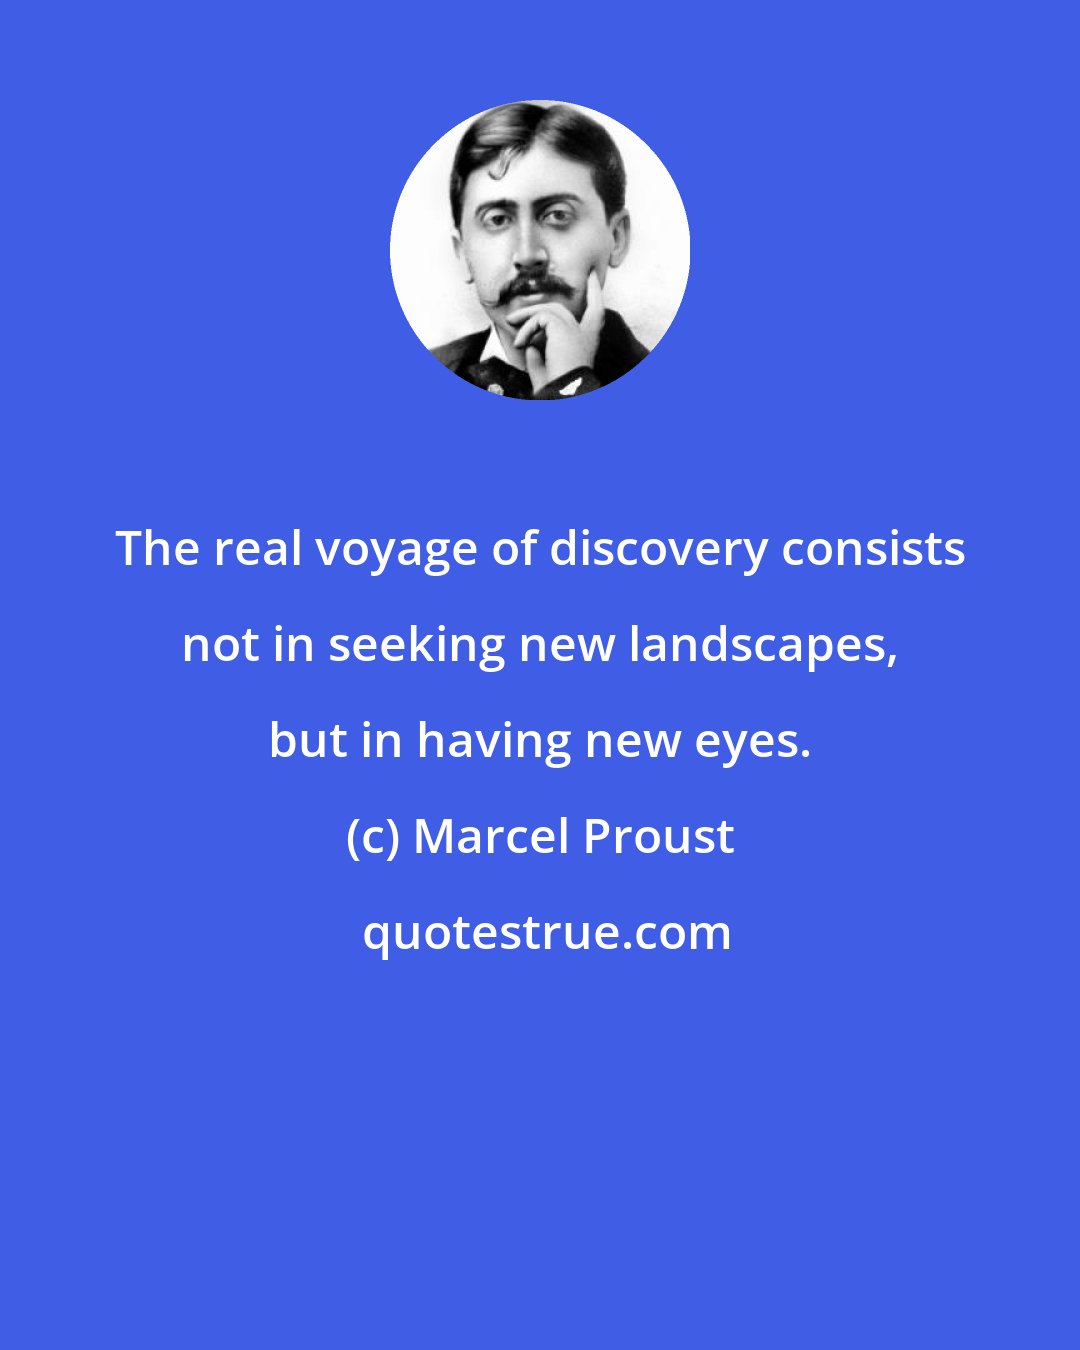 Marcel Proust: The real voyage of discovery consists not in seeking new landscapes, but in having new eyes.